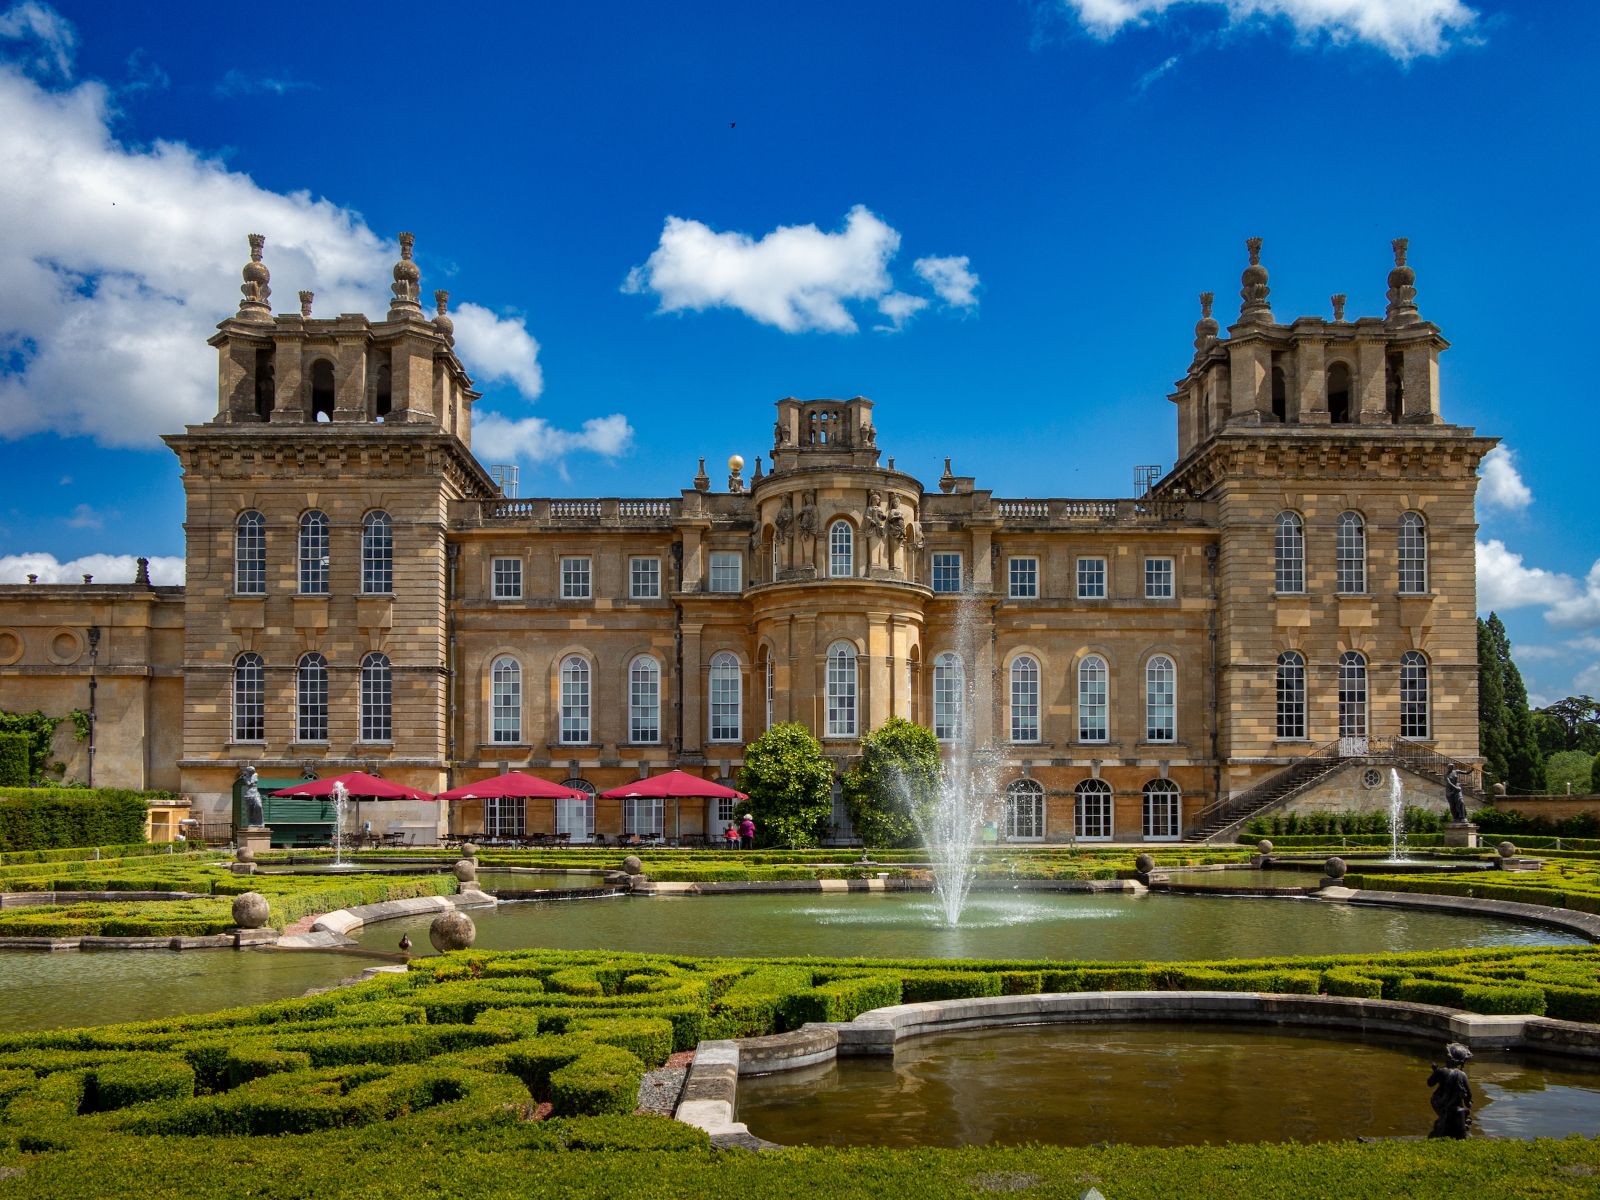 Fountains and gardens at the front of Blenheim Palace in Oxfordshire